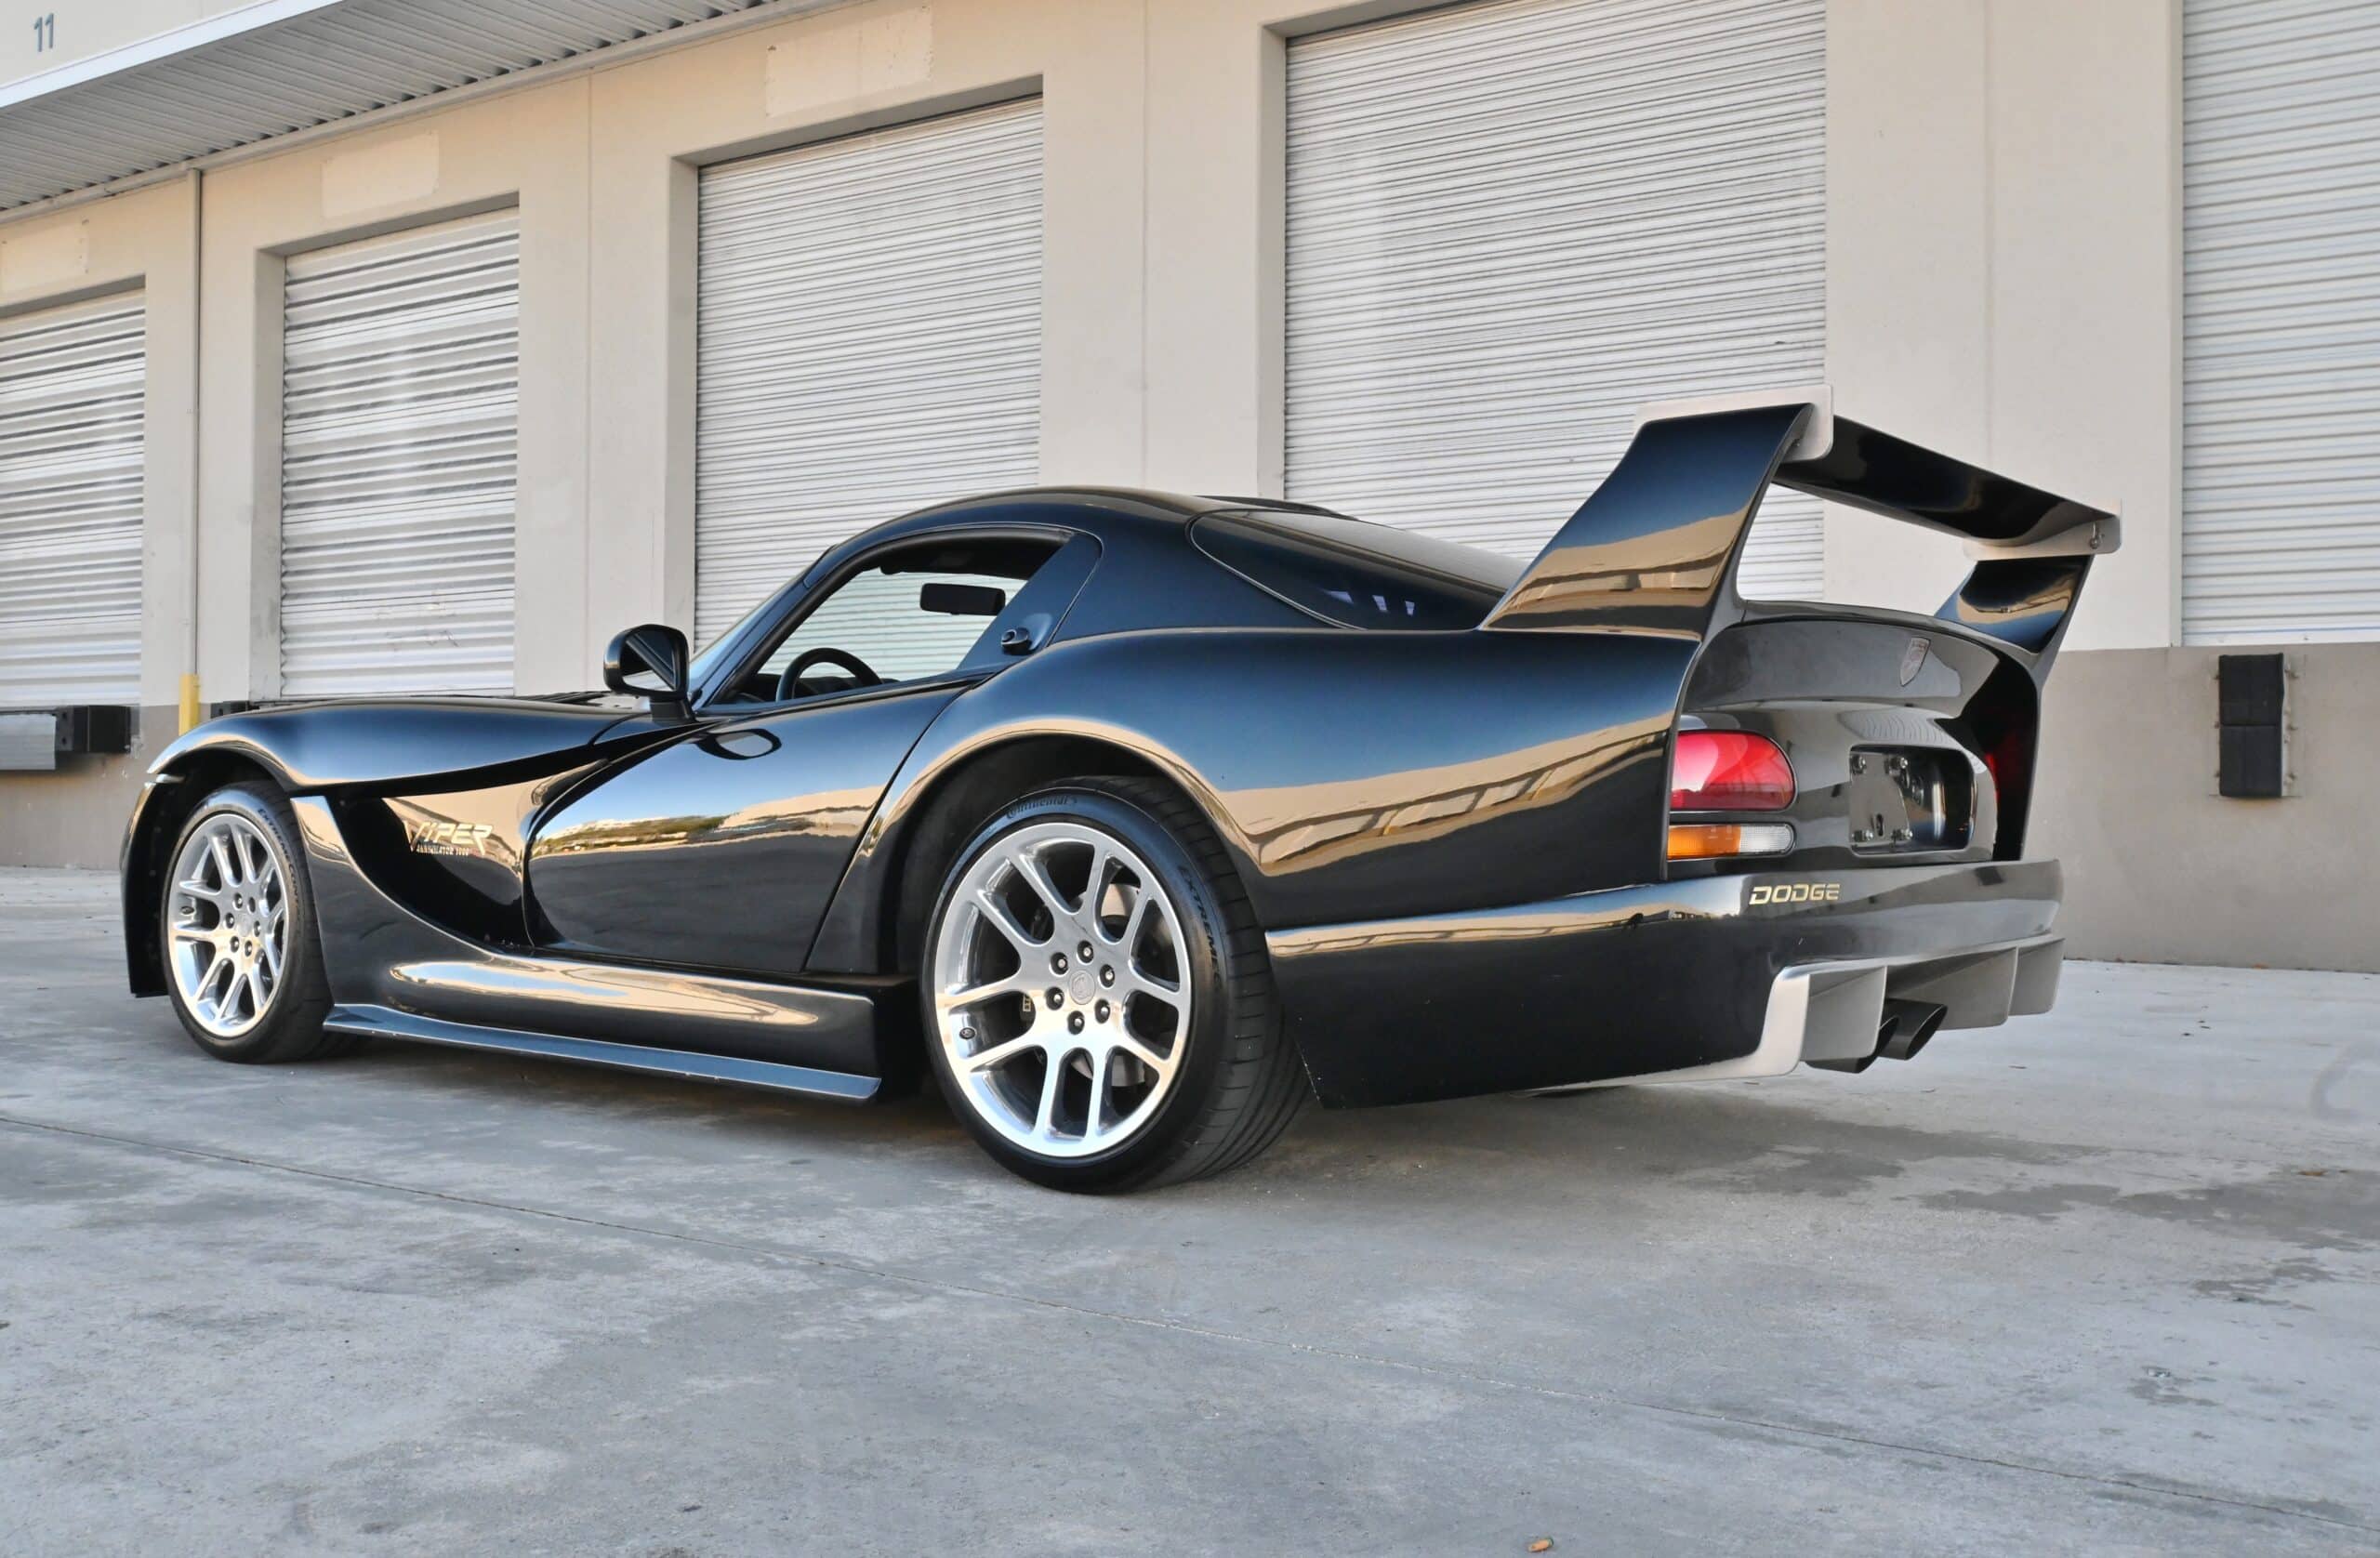 1999 Dodge Viper GTS / Supercharged / Wide body kit / Over $100k invested Custom Built Annihilator S/C 880WHP